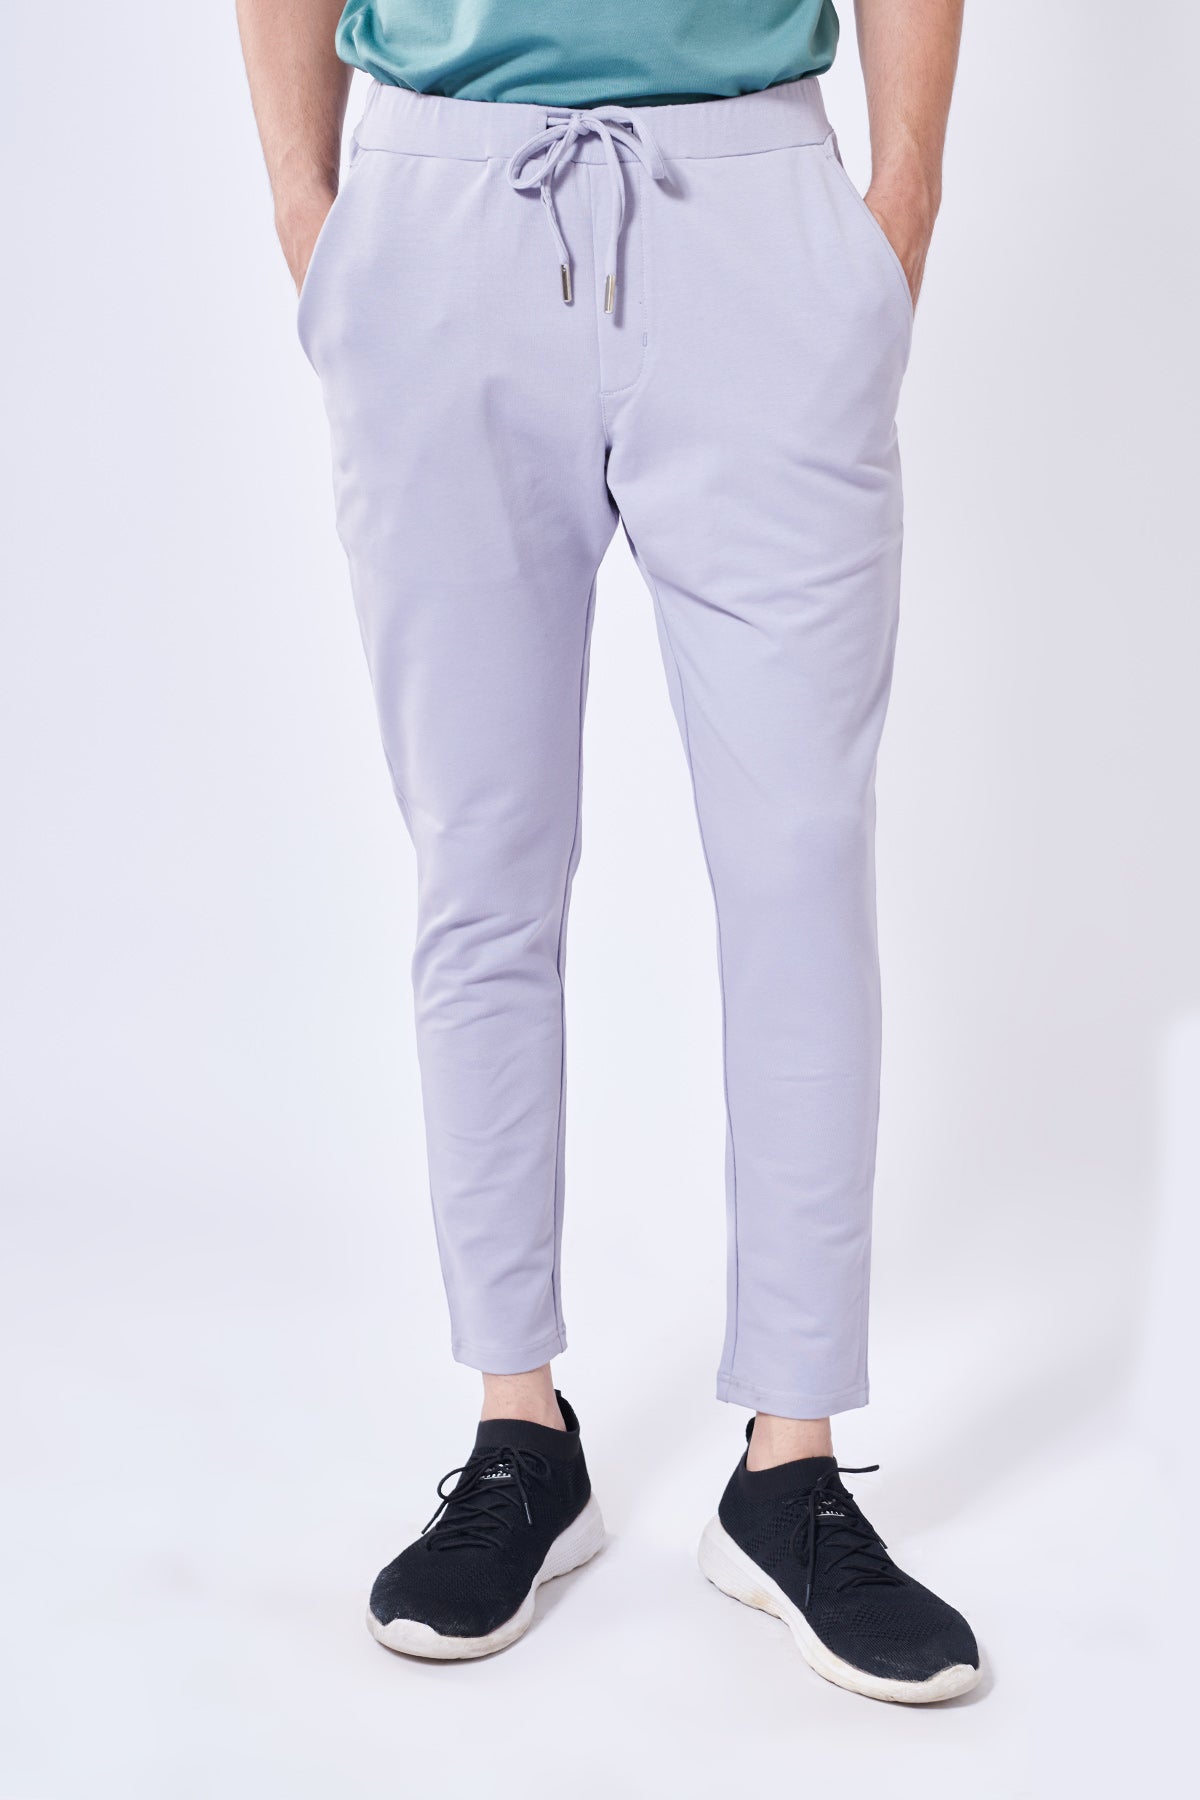 Easy French Grey Sweatpant